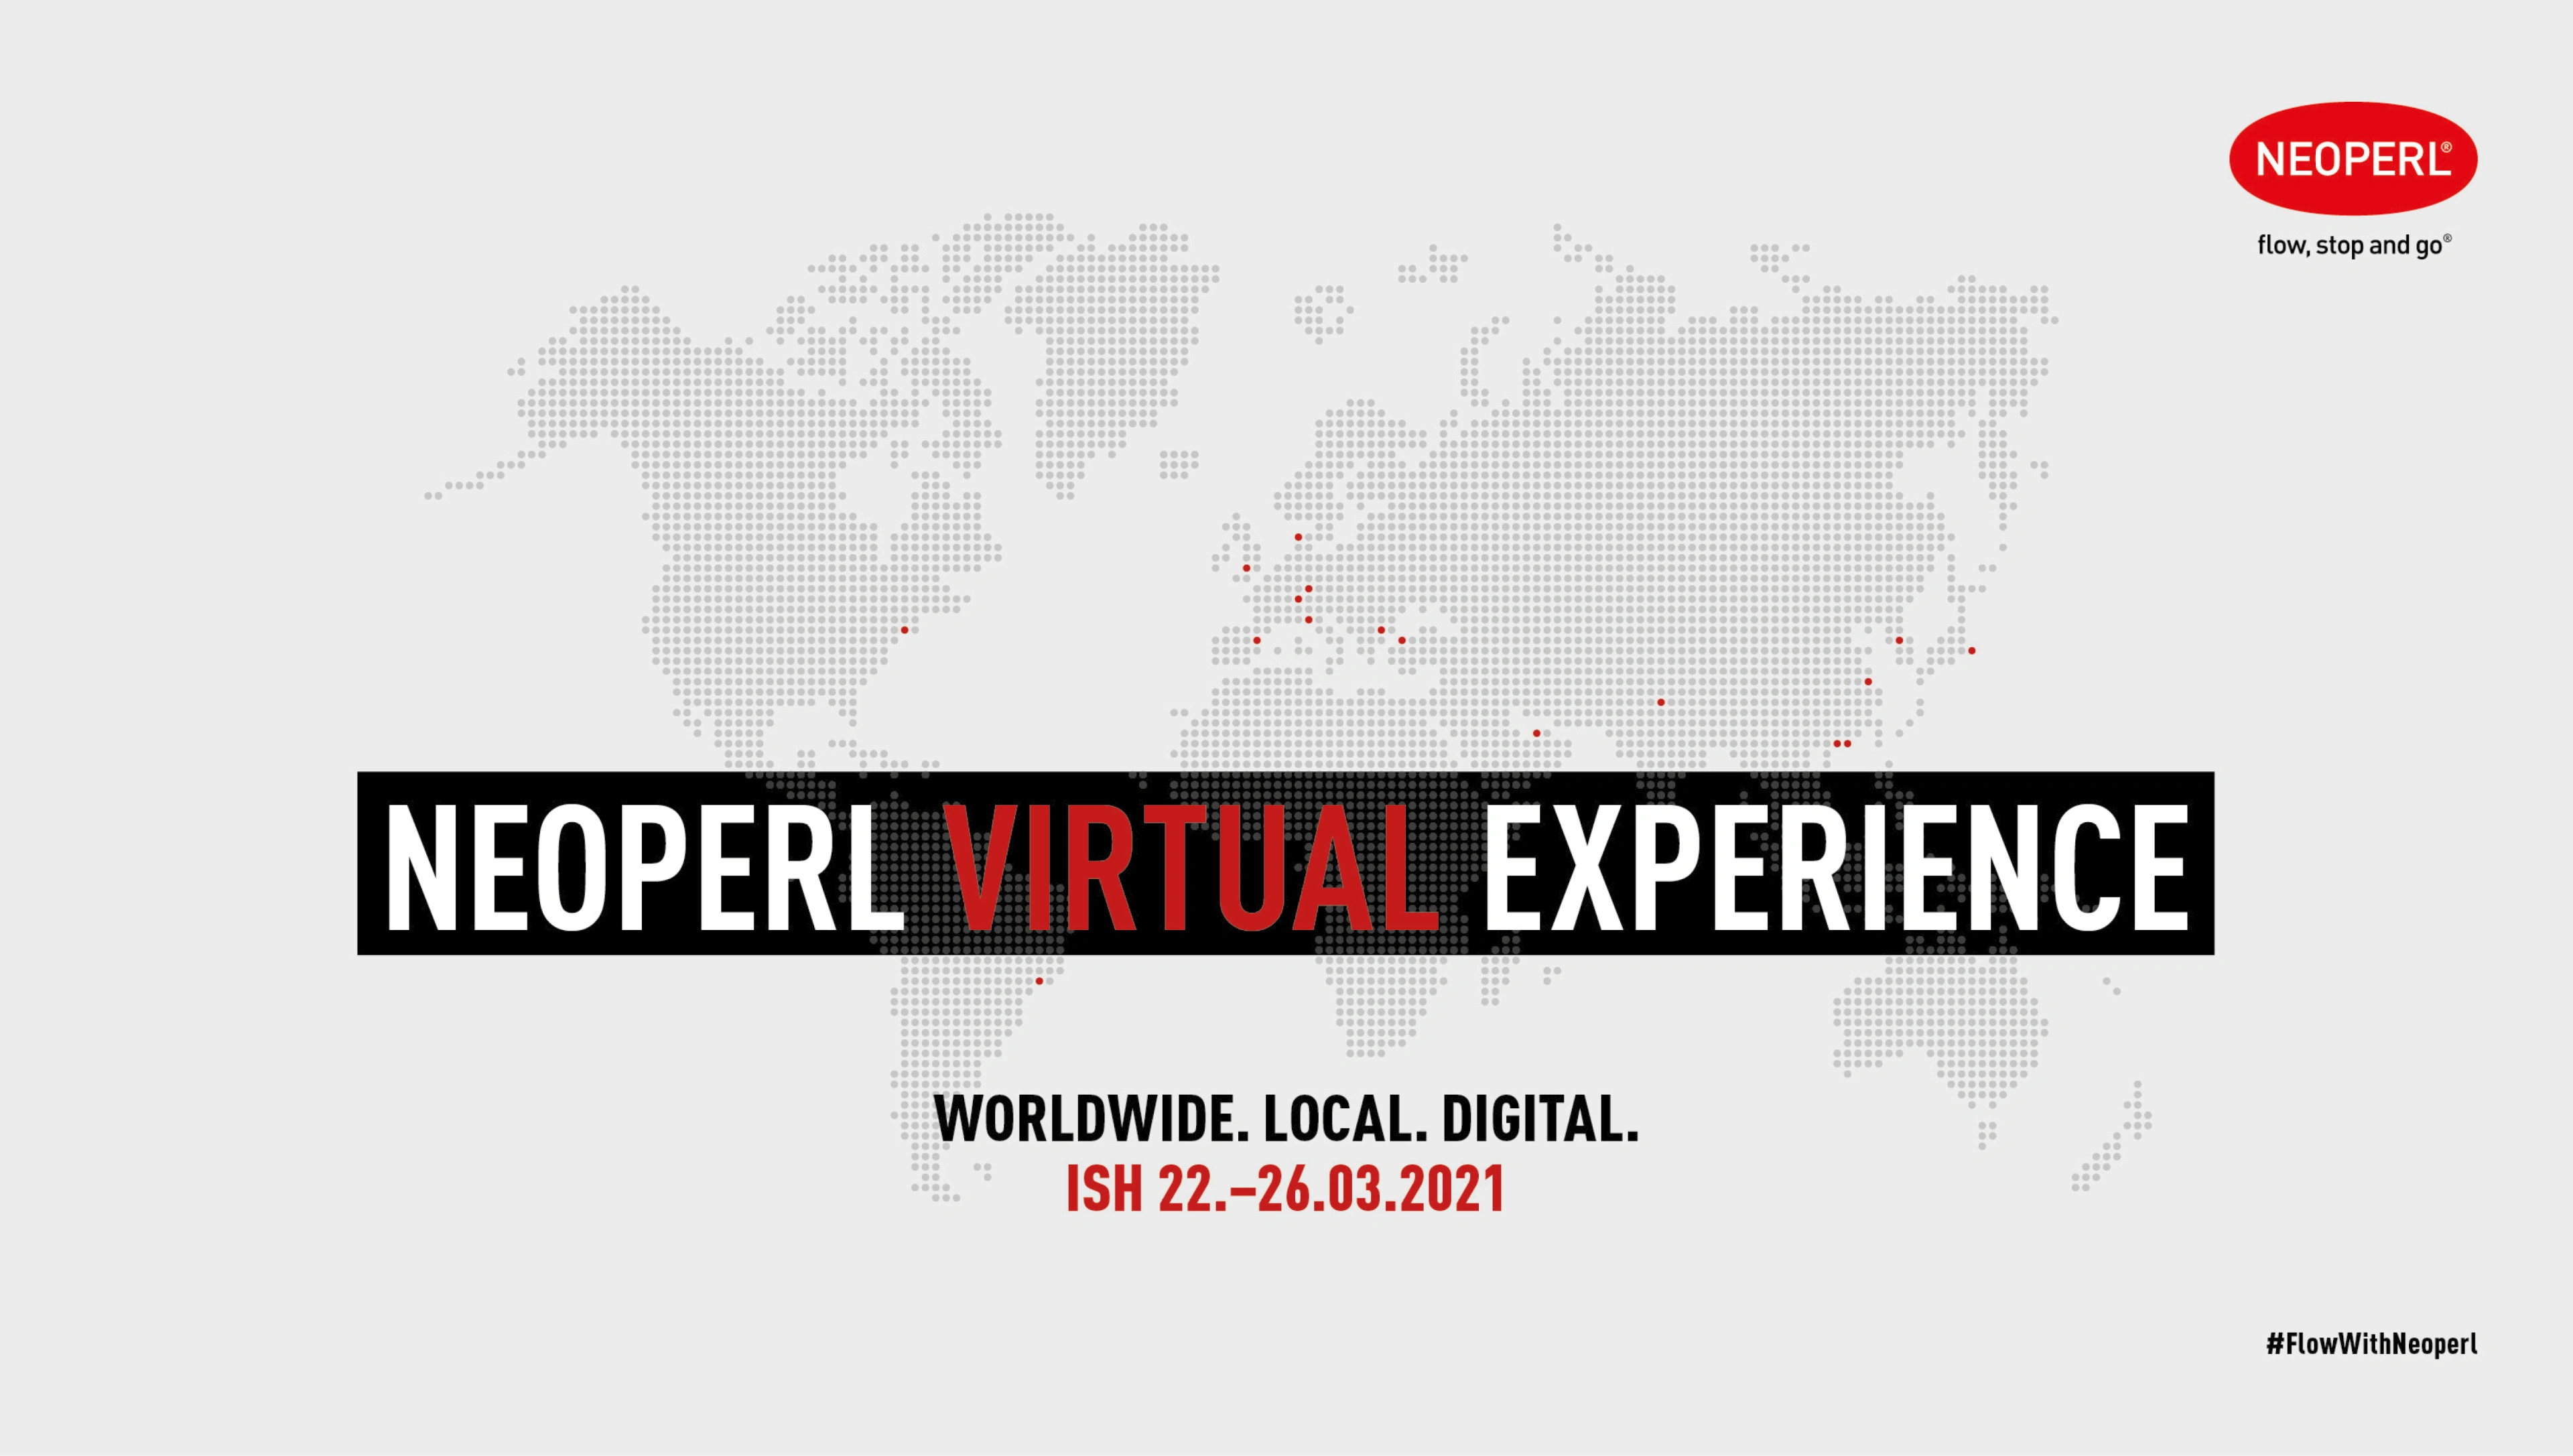 Neoperl Virtual Experience 2021 for OEM/industry customers